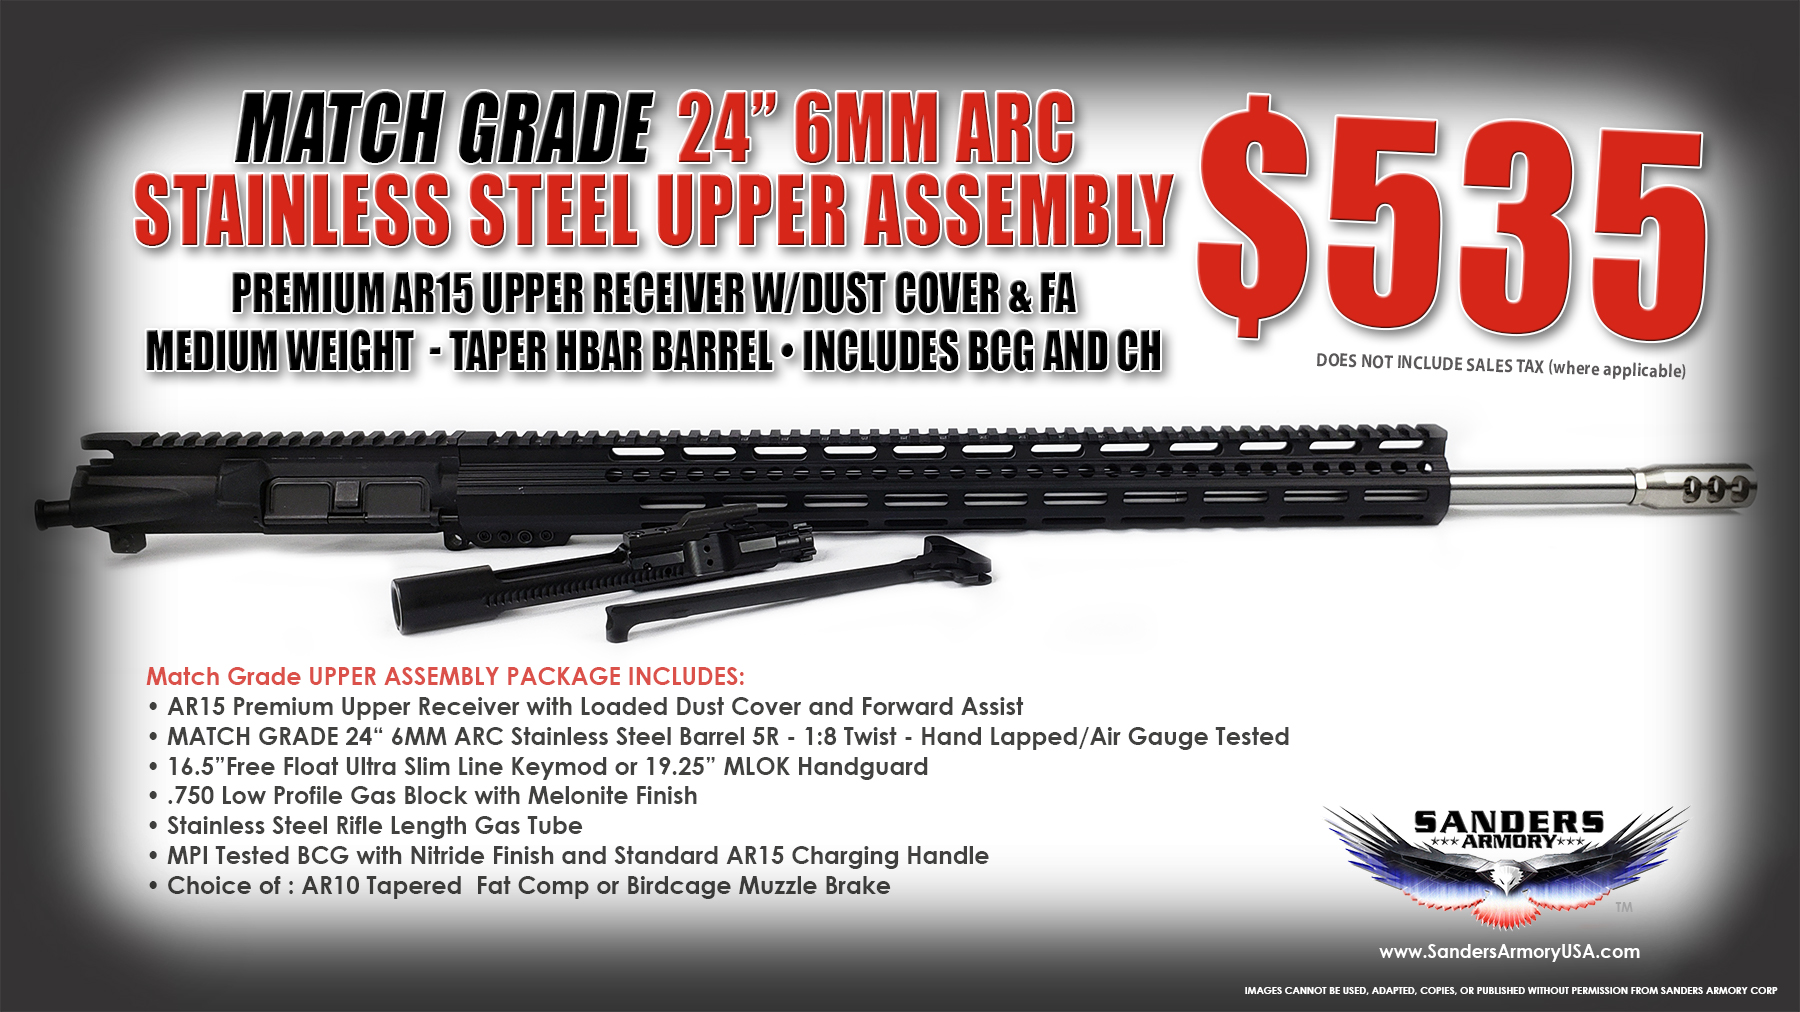 Sanders Armory 24 6MM ARC Upper Assembly